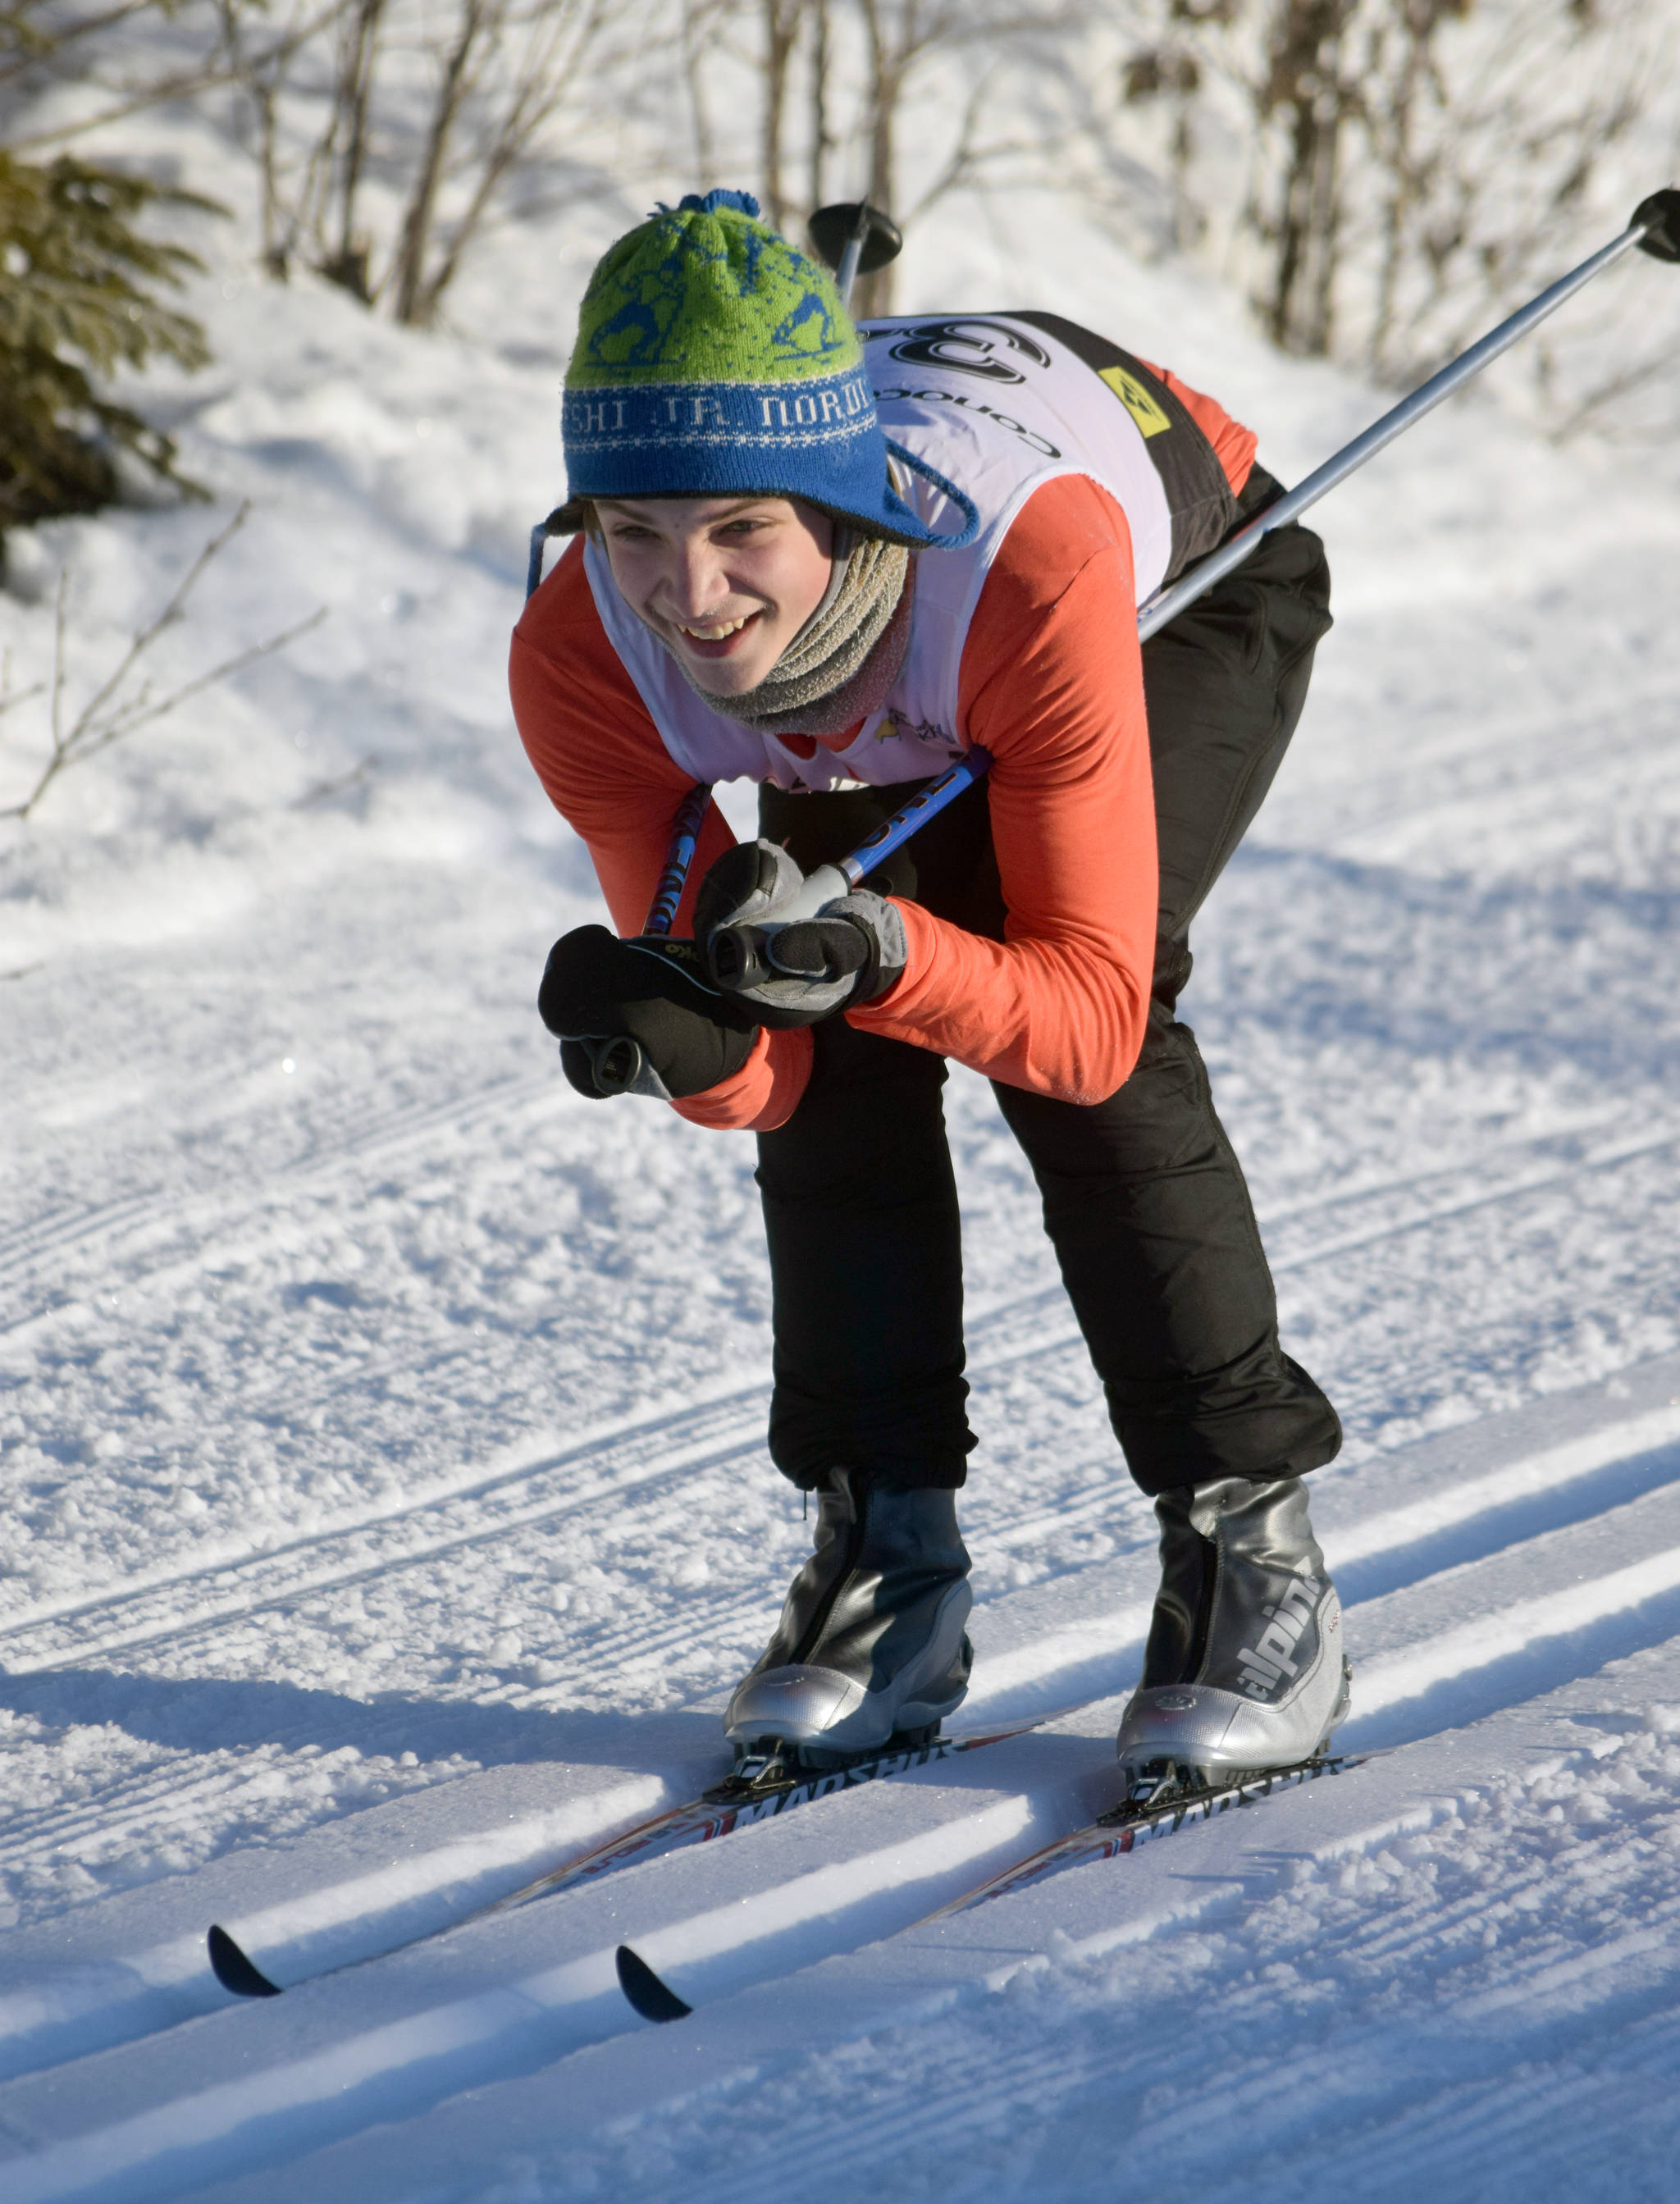 Kenai Central’s Quinten Cox competes at Besh Cup 4 on Sunday, Jan. 20 2019, at Tsalteshi Trails. (Photo by Jeff Helminiak/Peninsula Clarion)